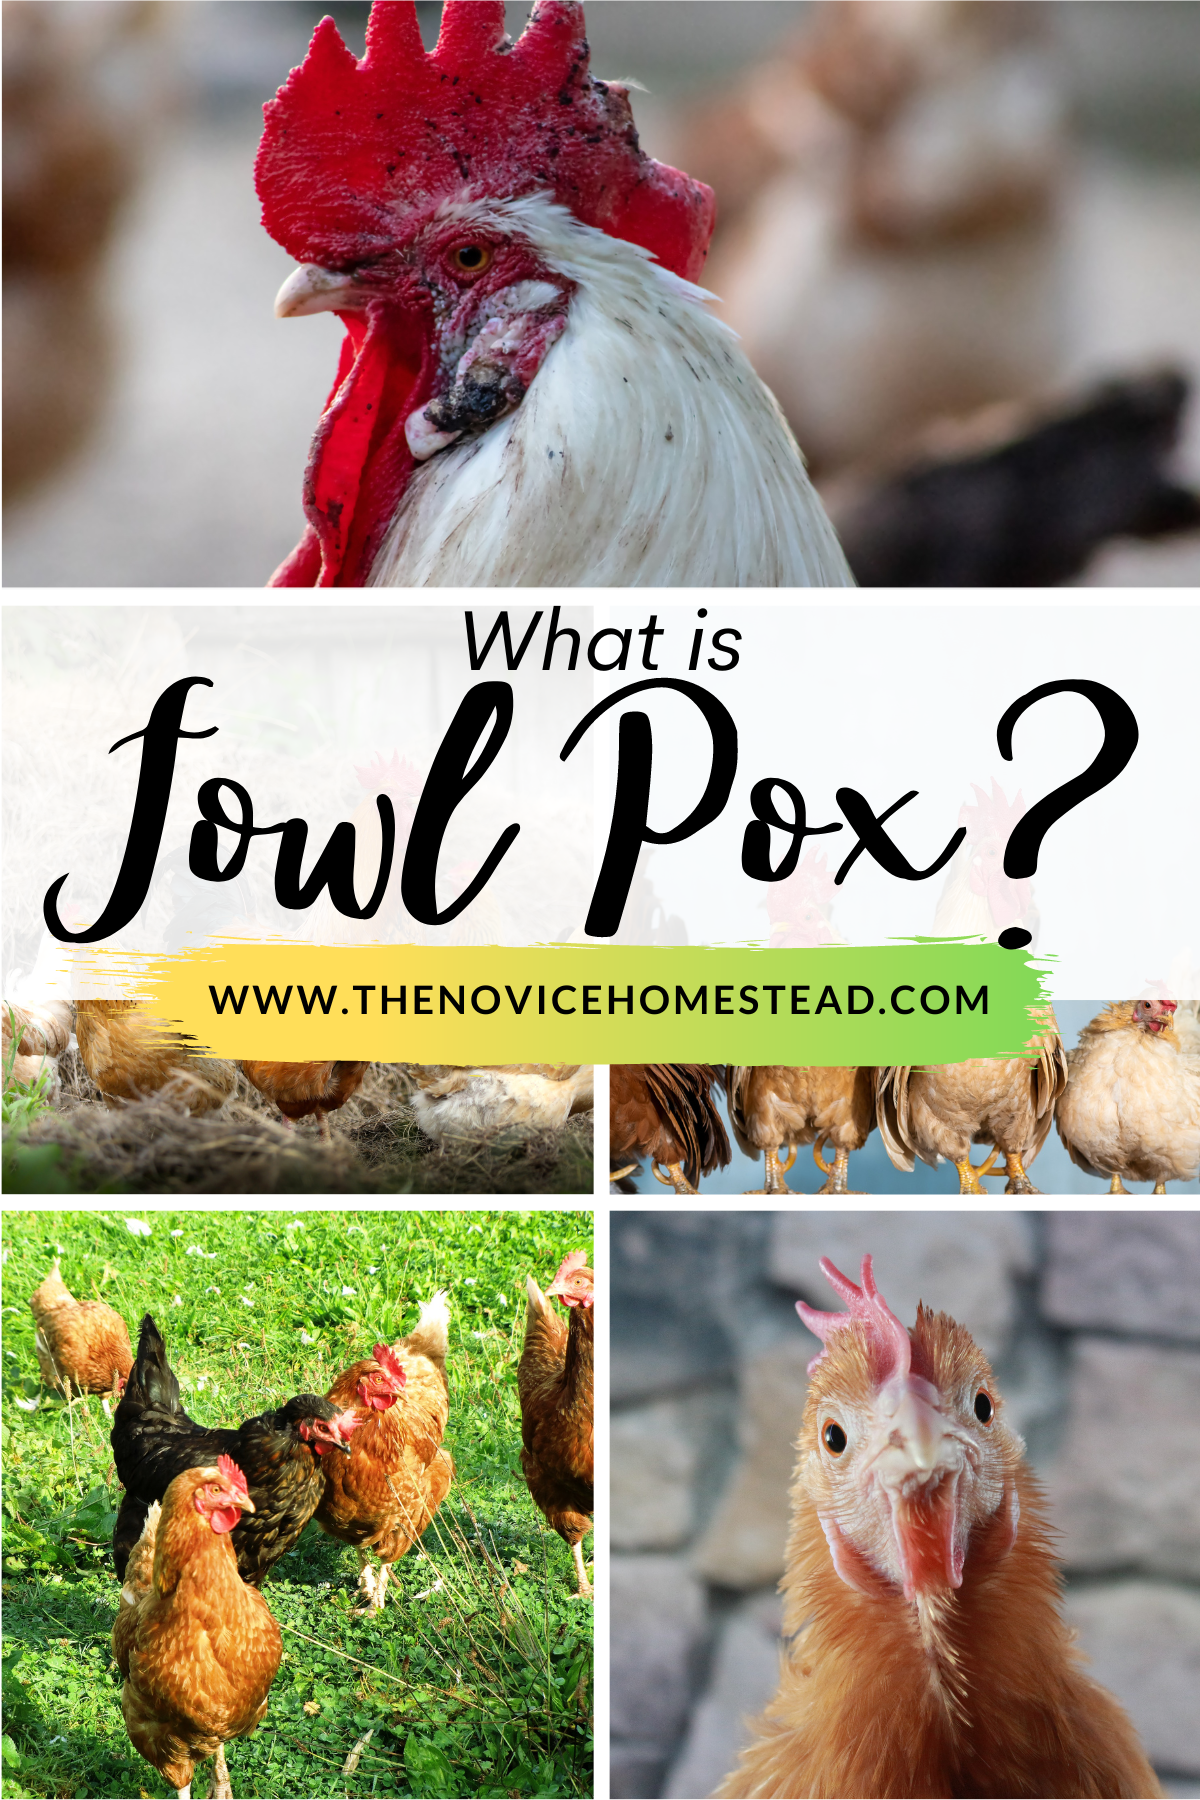 collage image of chicken photos; text overlay "What is Fowl Pox"